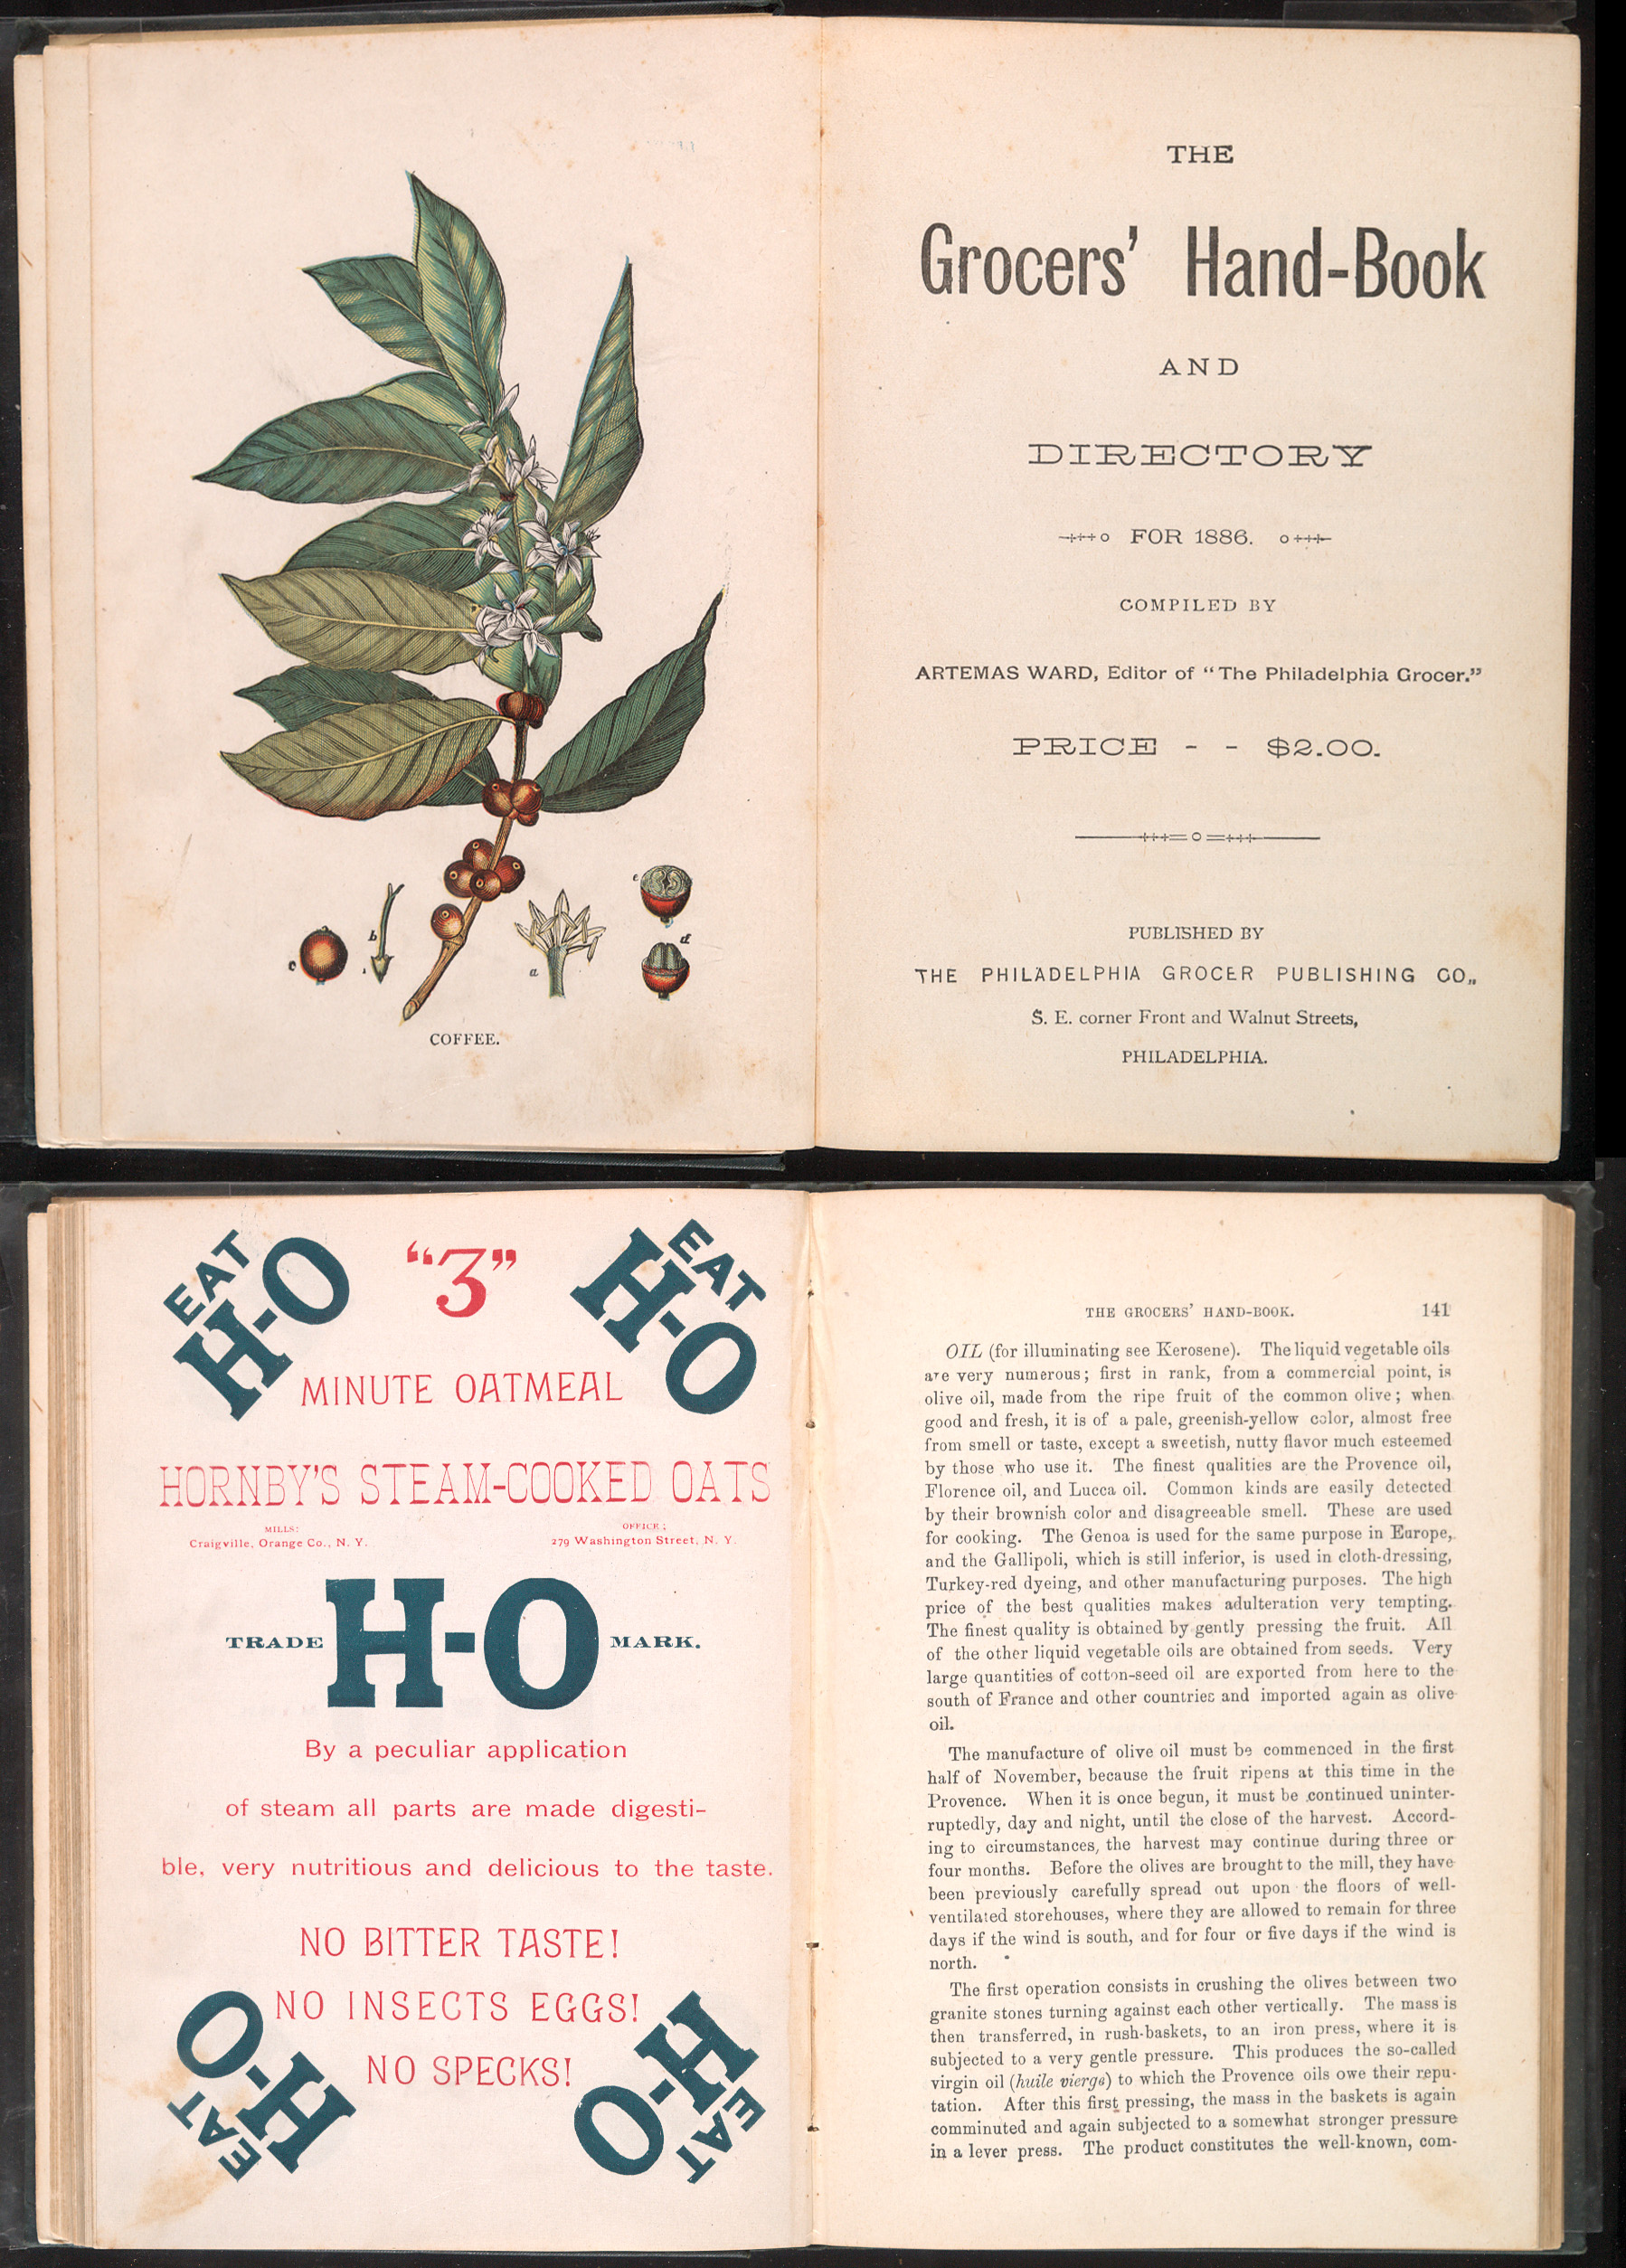 Frontispiece, titlepage and p 140-141 from The Grocers’ Hand-Book and Directory for 1886.